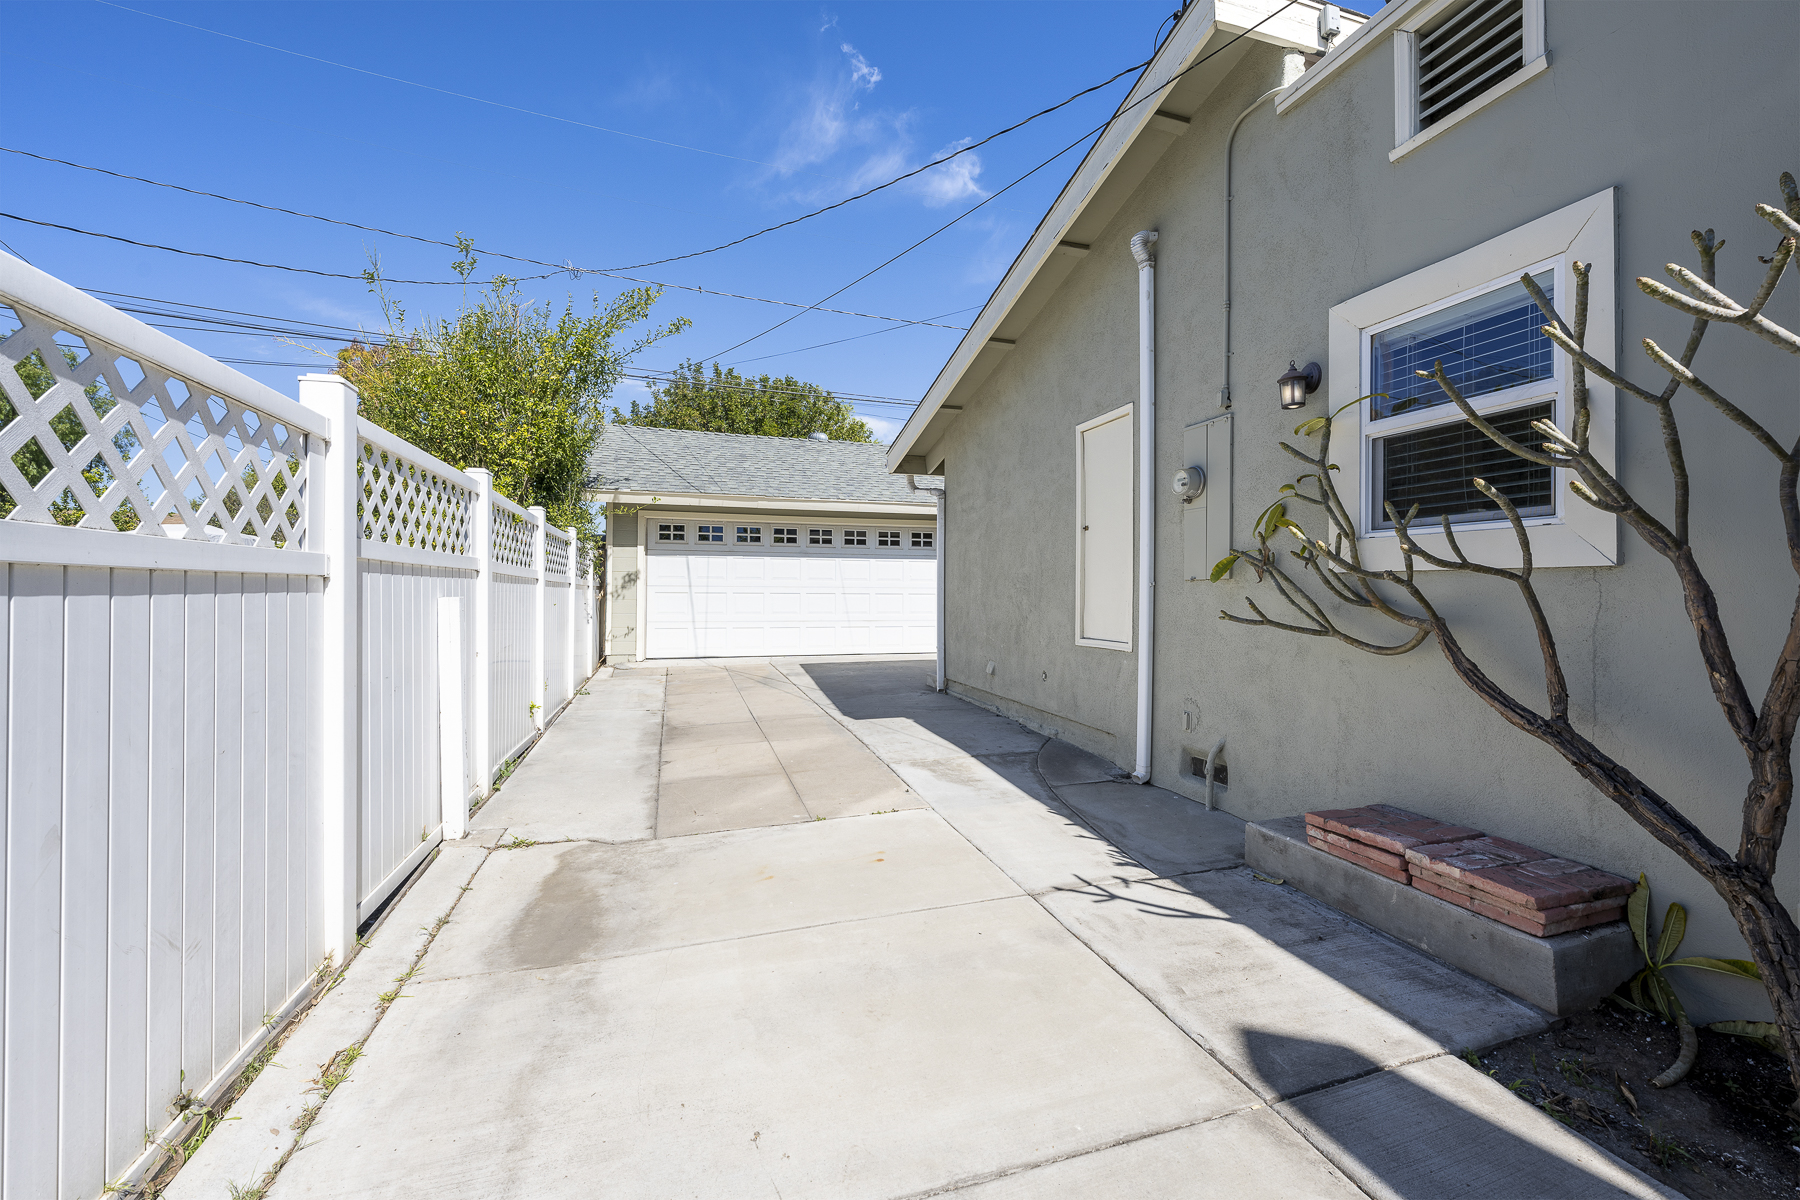 1229 Grove Place Fullerton CA 92831: Garage and side of home from driveway